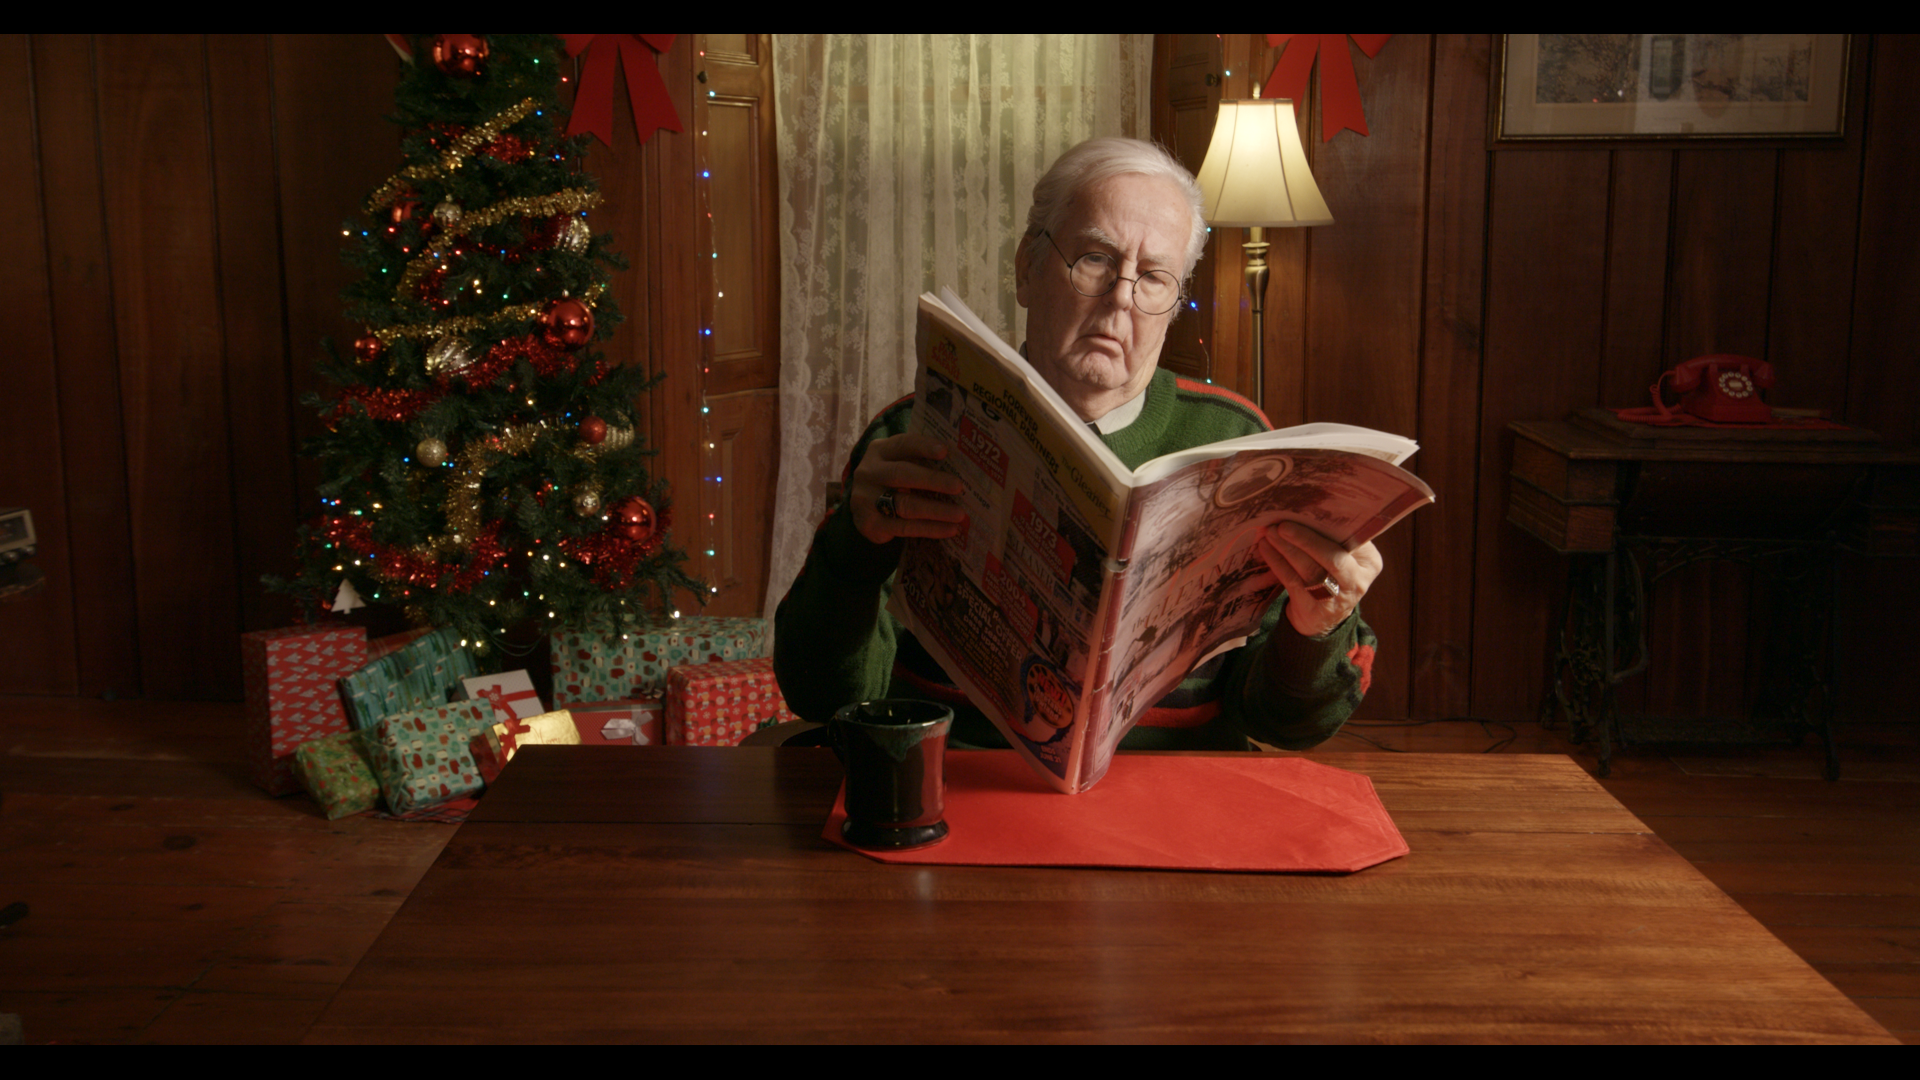 An old man reading a newspaper on Christmas day